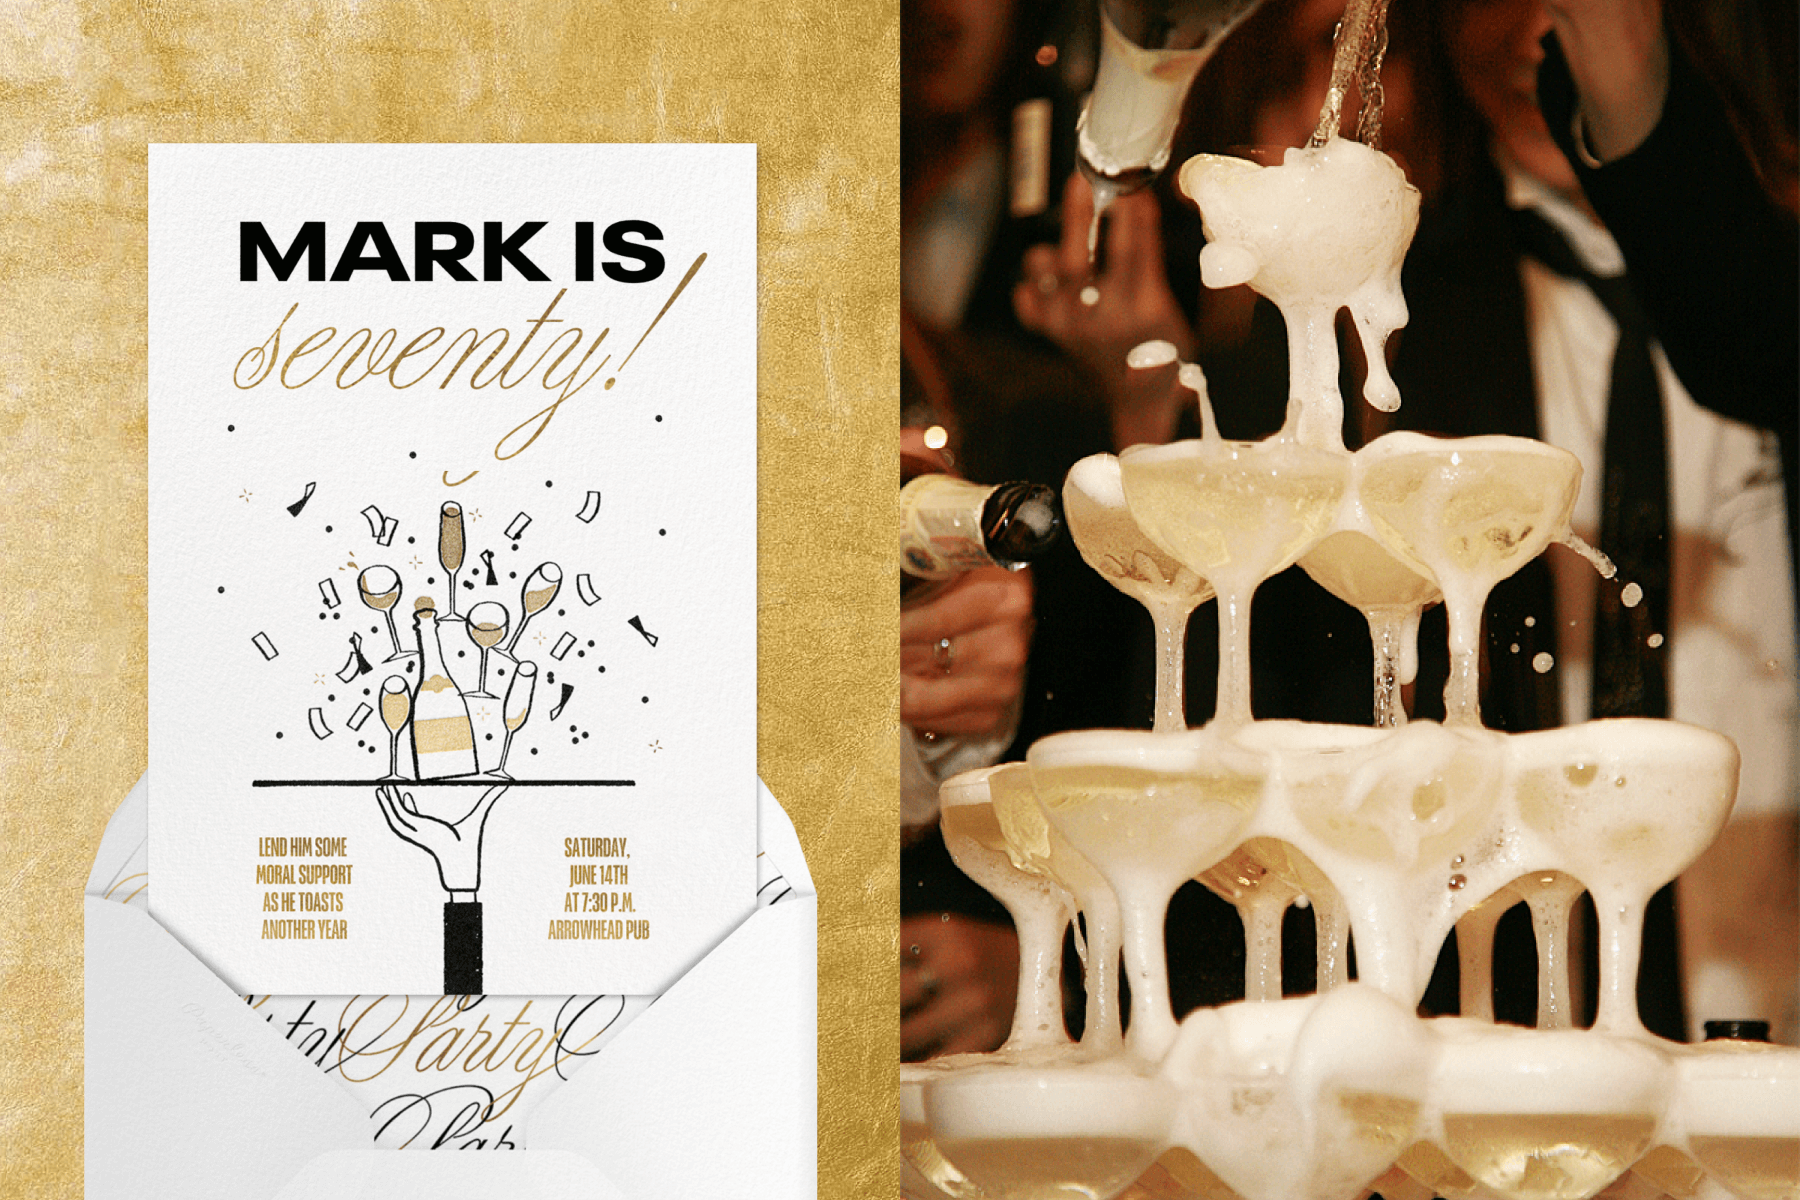 Left: birthday invitation with an illustrated hand holding up a tray of Champagne and glasses. Right: A Champagne tower overflowing with froth